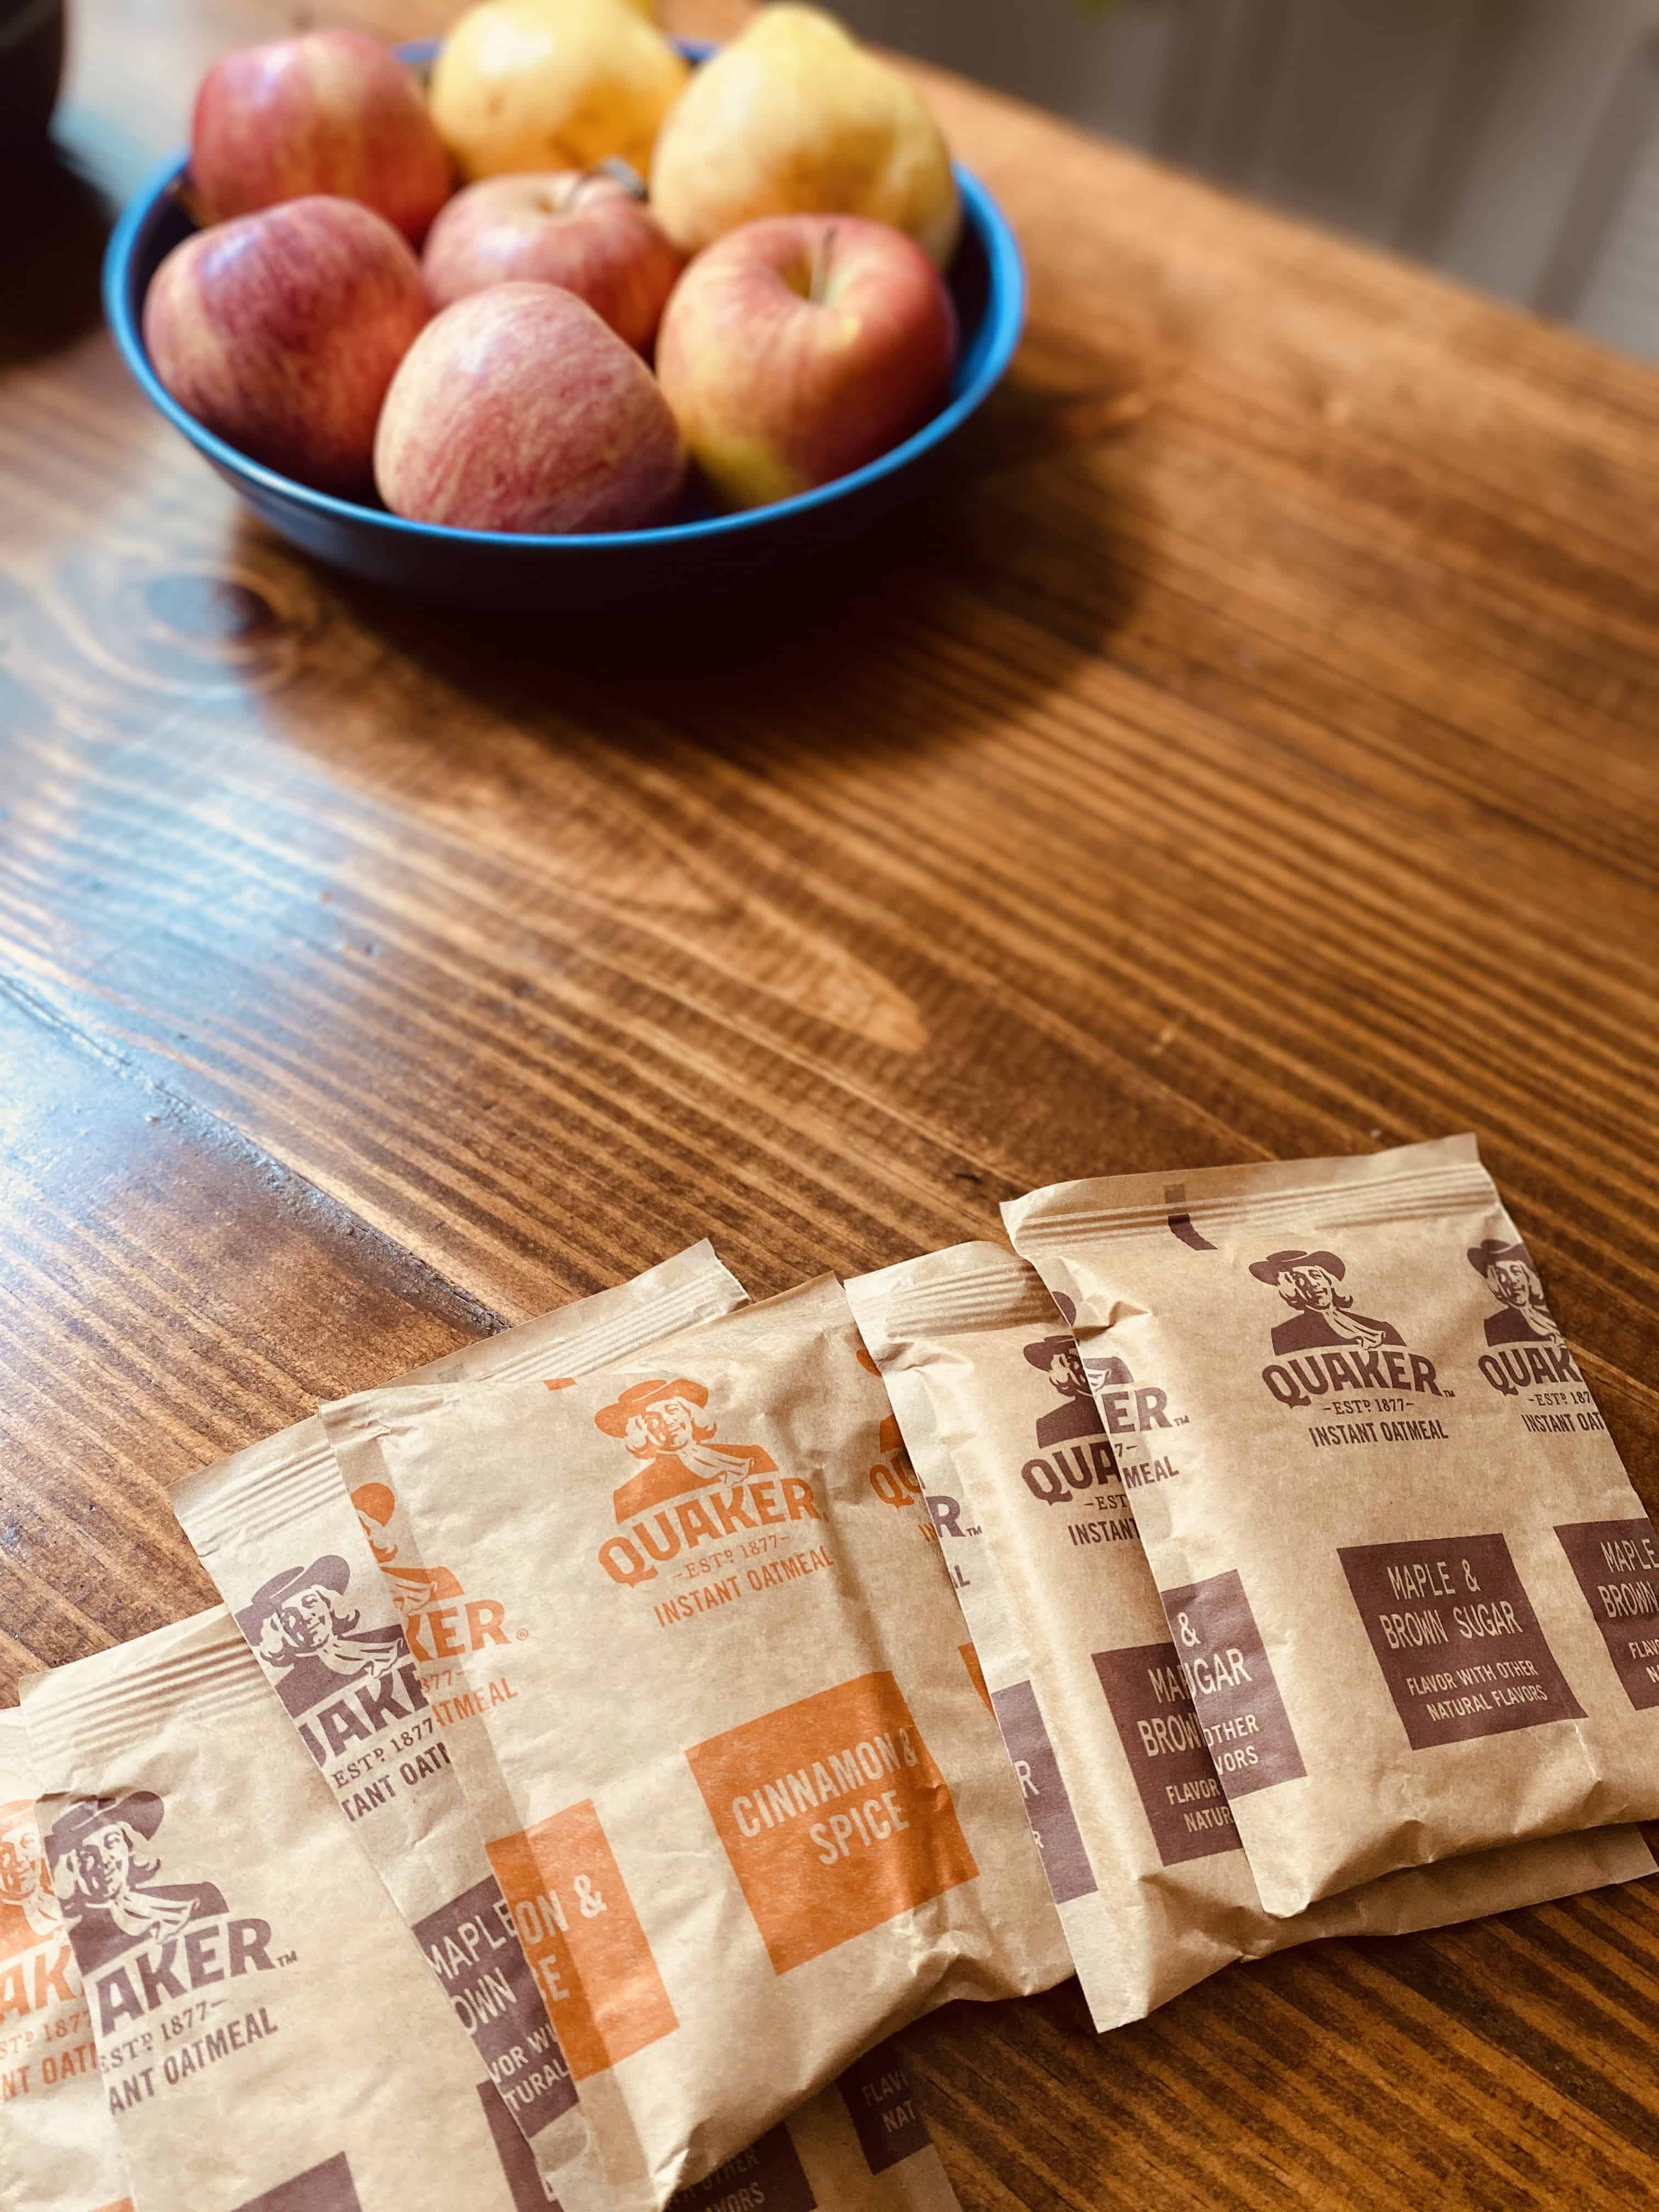 Instant oatmeal packets make the crumble super easy